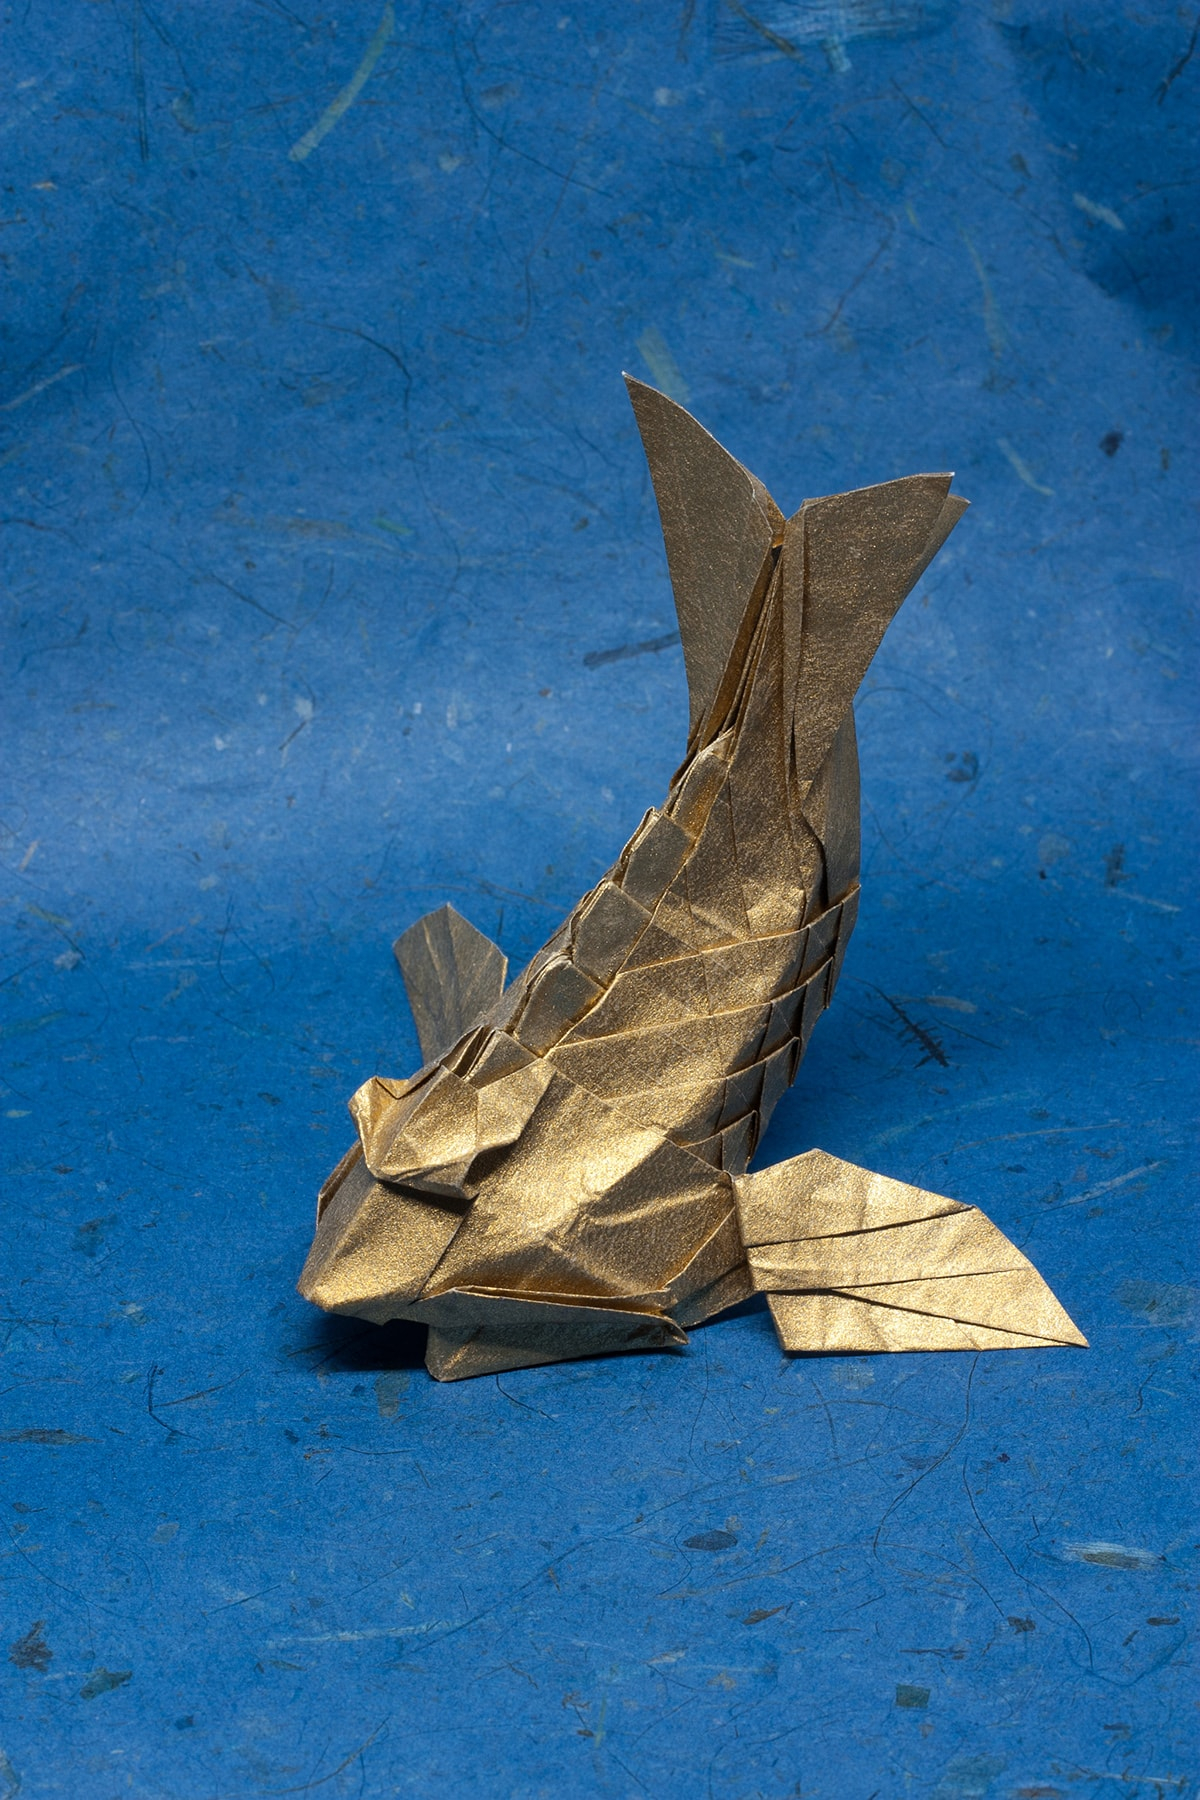 Dollar Bill Koi Fish Origami Instructions You Should Definitely Give A Carp About These Beautiful Origami Koi